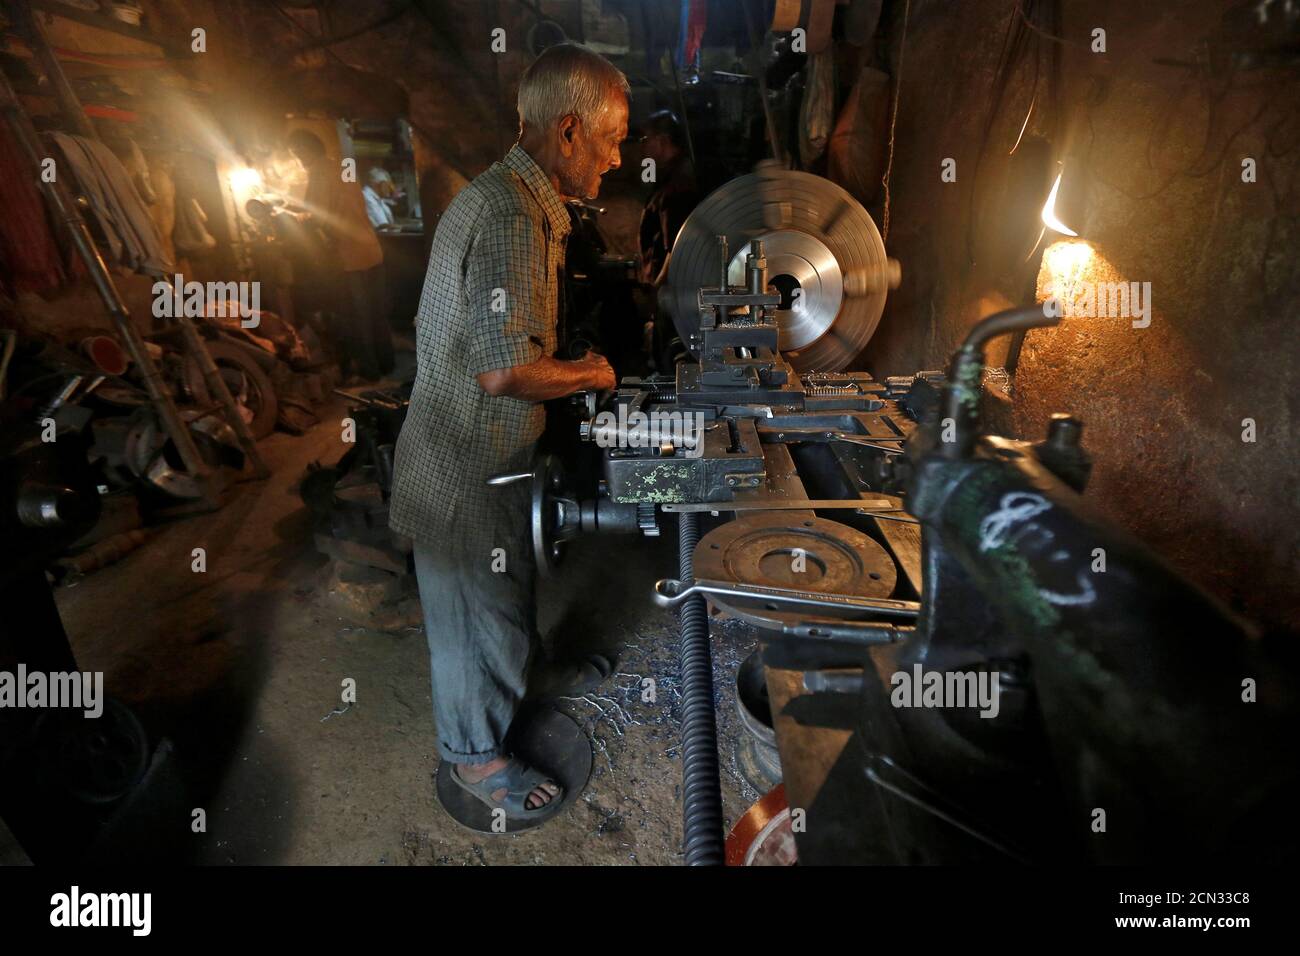 A worker operates a lathe as he makes spare parts of drilling machines at a workshop in Kolkata, India, June 10, 2016. REUTERS/Rupak De Chowdhuri Stock Photo